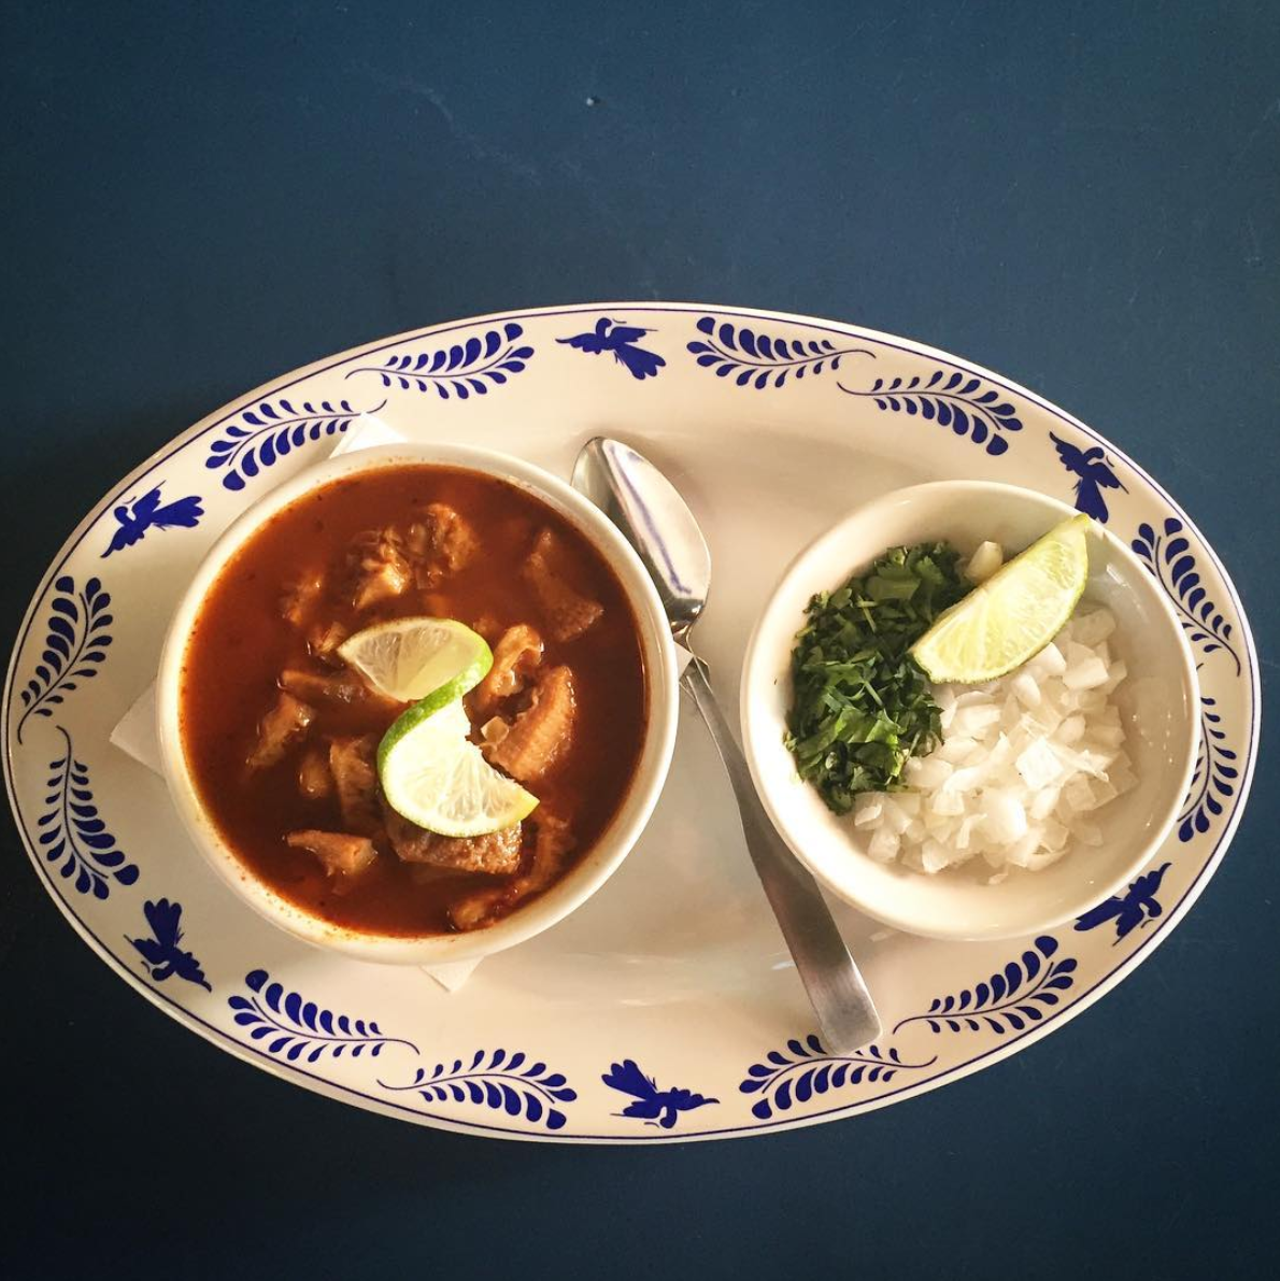 La Gloria
100 E. Grayson St., (210) 267-9040, lagloria.com
Dedicated to offering interior Mexican cuisine to San Antonio, La Gloria offers menudo on occasion, so be sure to check before going. Other than that, fideo is a complimentary appetizer.
Photo via Instagram / lagloriasa